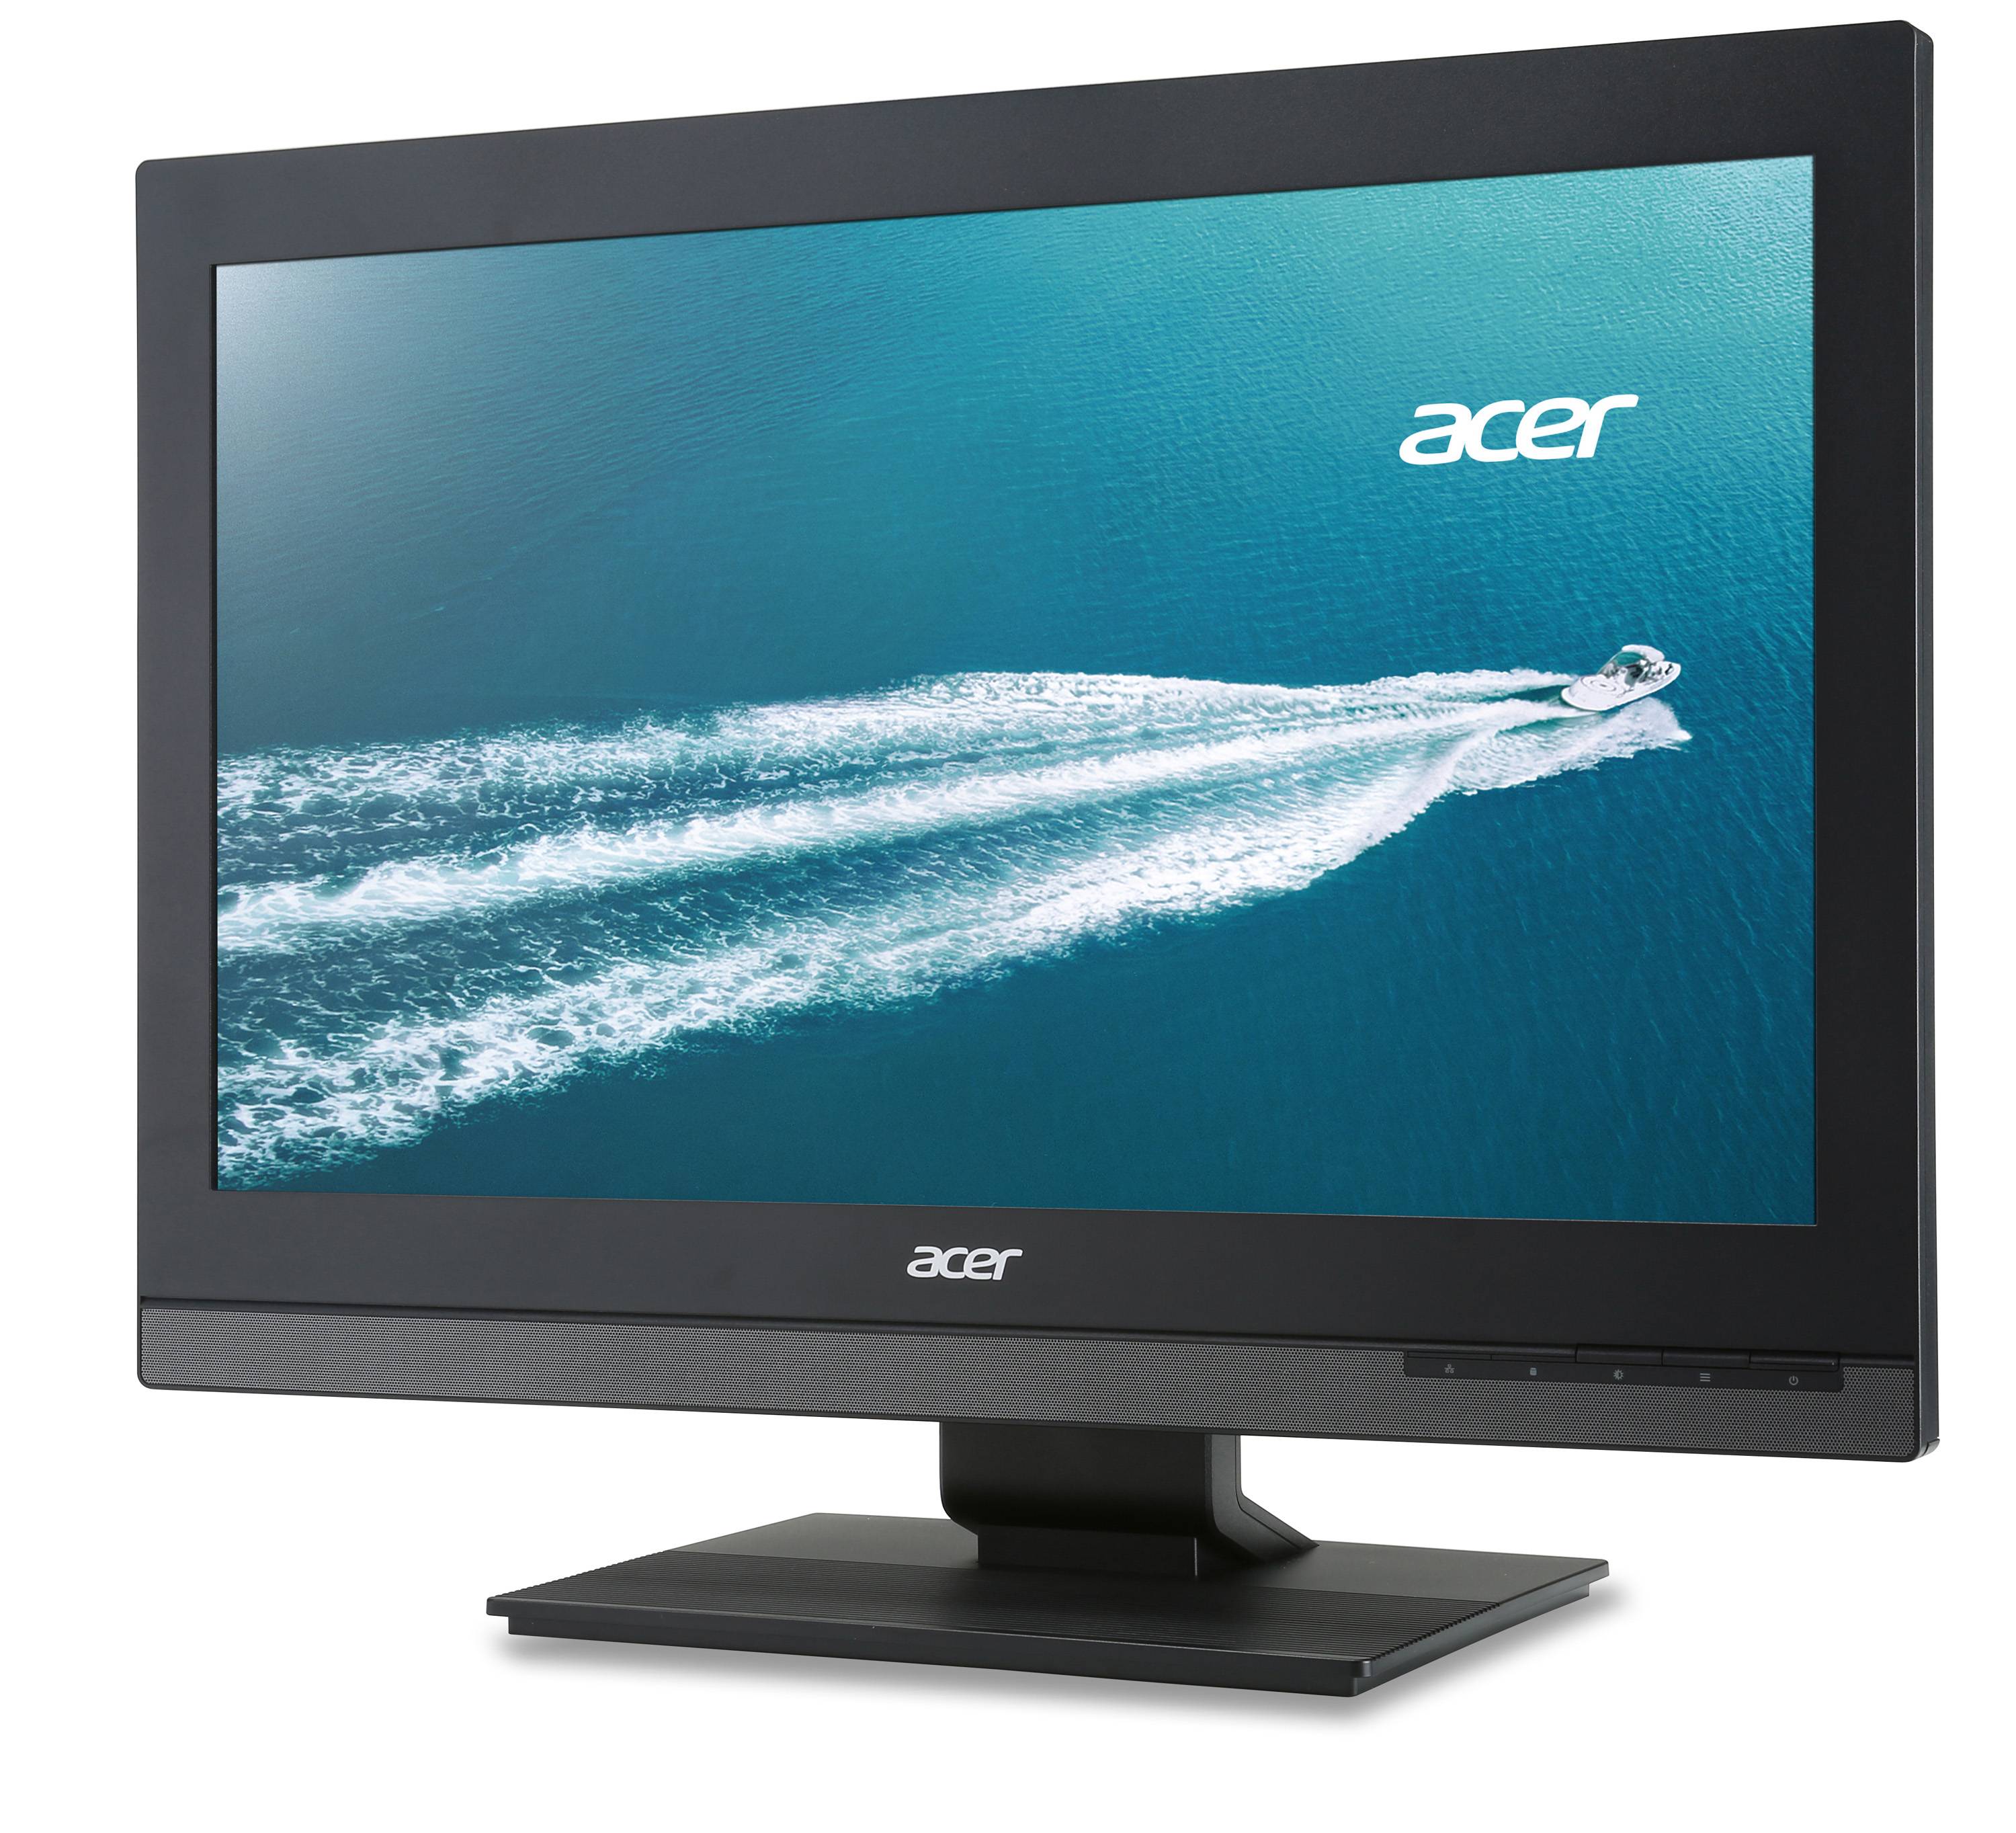 Acer Veriton Wallpapers 2015